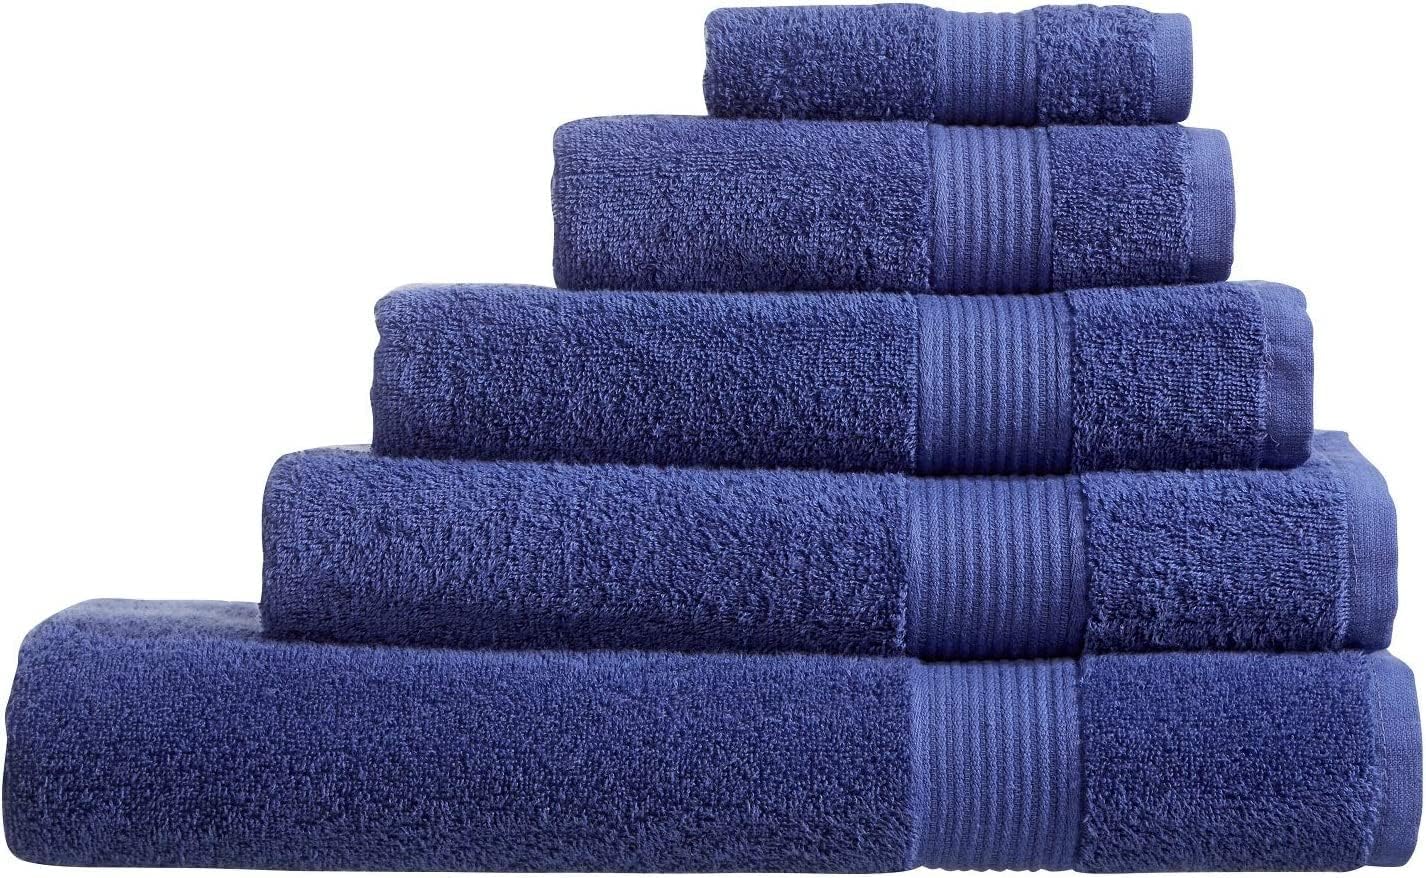 100% Egyptian Cotton Bath Towels Jumbo Sheets 500GSM Super Absorbent Quick Dry Soft Bathroom